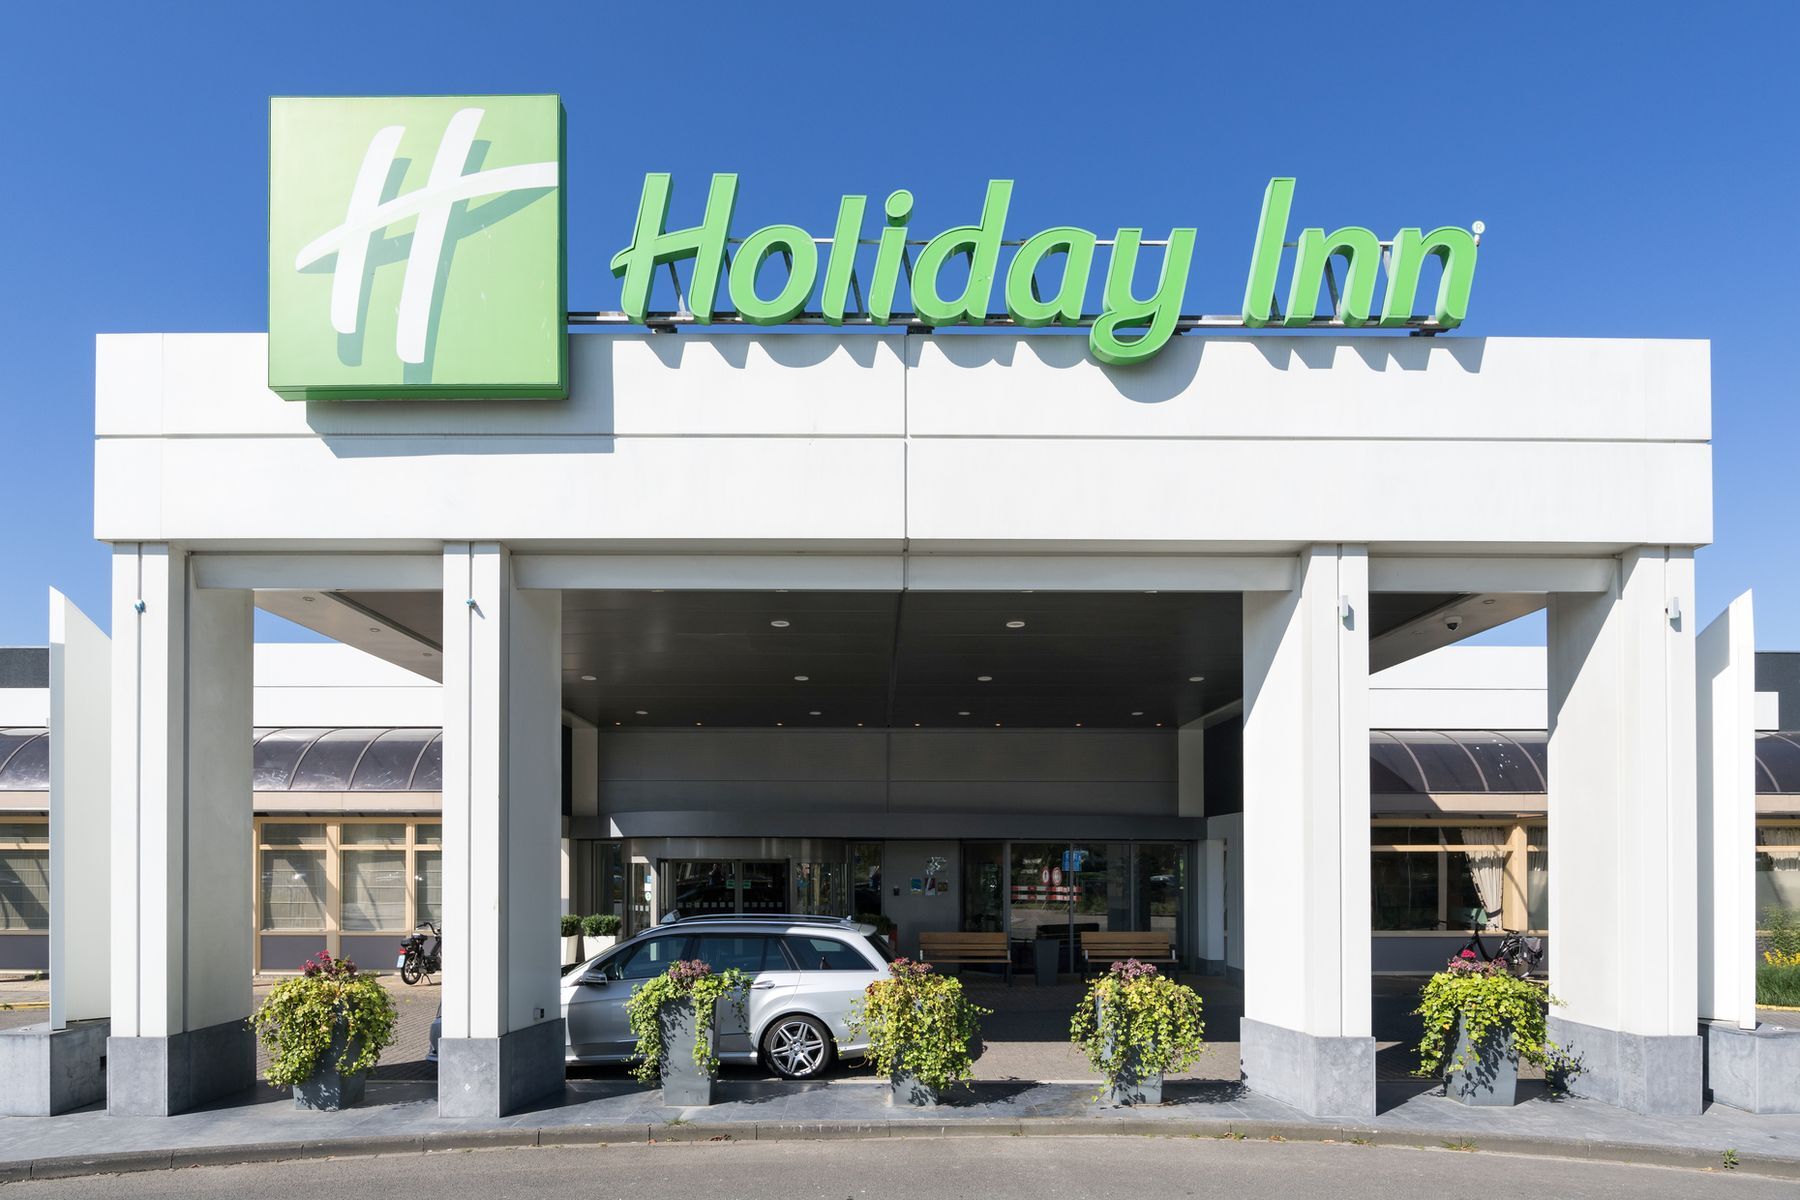 <p>Any hotel brand that can boast <a href="https://www.youtube.com/watch?v=GmKjTC8yDFM&ab_channel=ChingyVEVO">a hit song featuring Snoop Dogg</a> bearing its name is likely doing something right. The popular budget-friendly chain got its start as a single motel in Memphis, Tennessee after founder <a href="https://www.cnn.com/travel/article/holiday-inn-70th-anniversary/index.html">Kemmons Wilson was left unhappy</a> with poor roadside accommodation conditions and figured he could do better. Even the name is rooted in lore, being taken from <a href="https://www.imdb.com/title/tt0034862/">a hit 1942 film</a> starring Bing Crosby and Fred Astaire.</p>